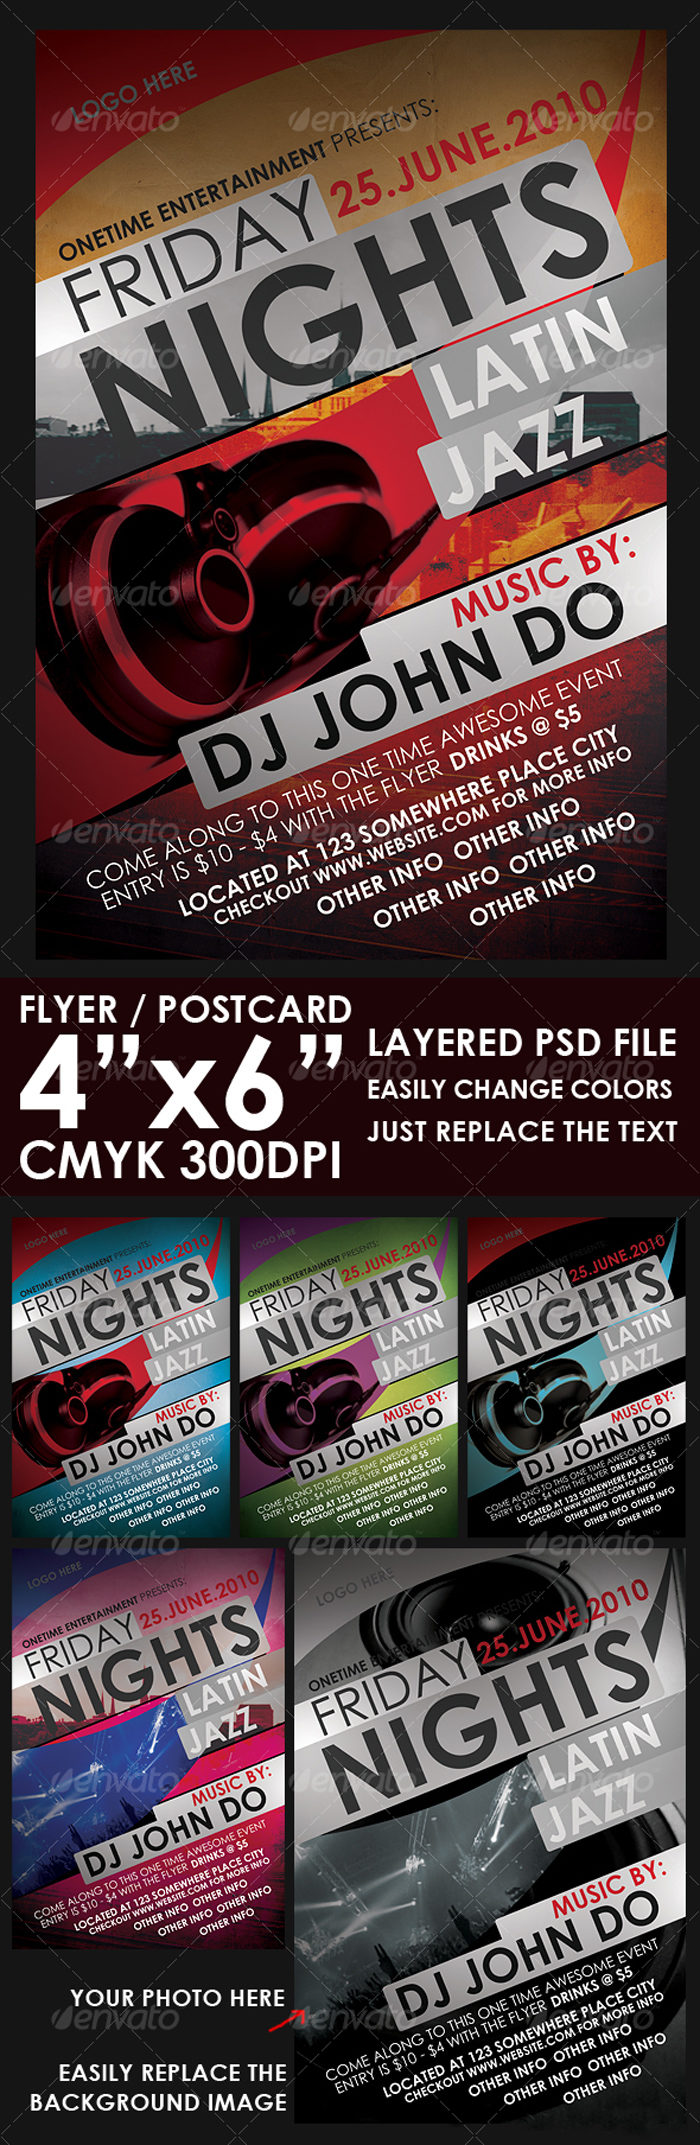 341113-700x2145 43 Flyer templates you should download for your clients